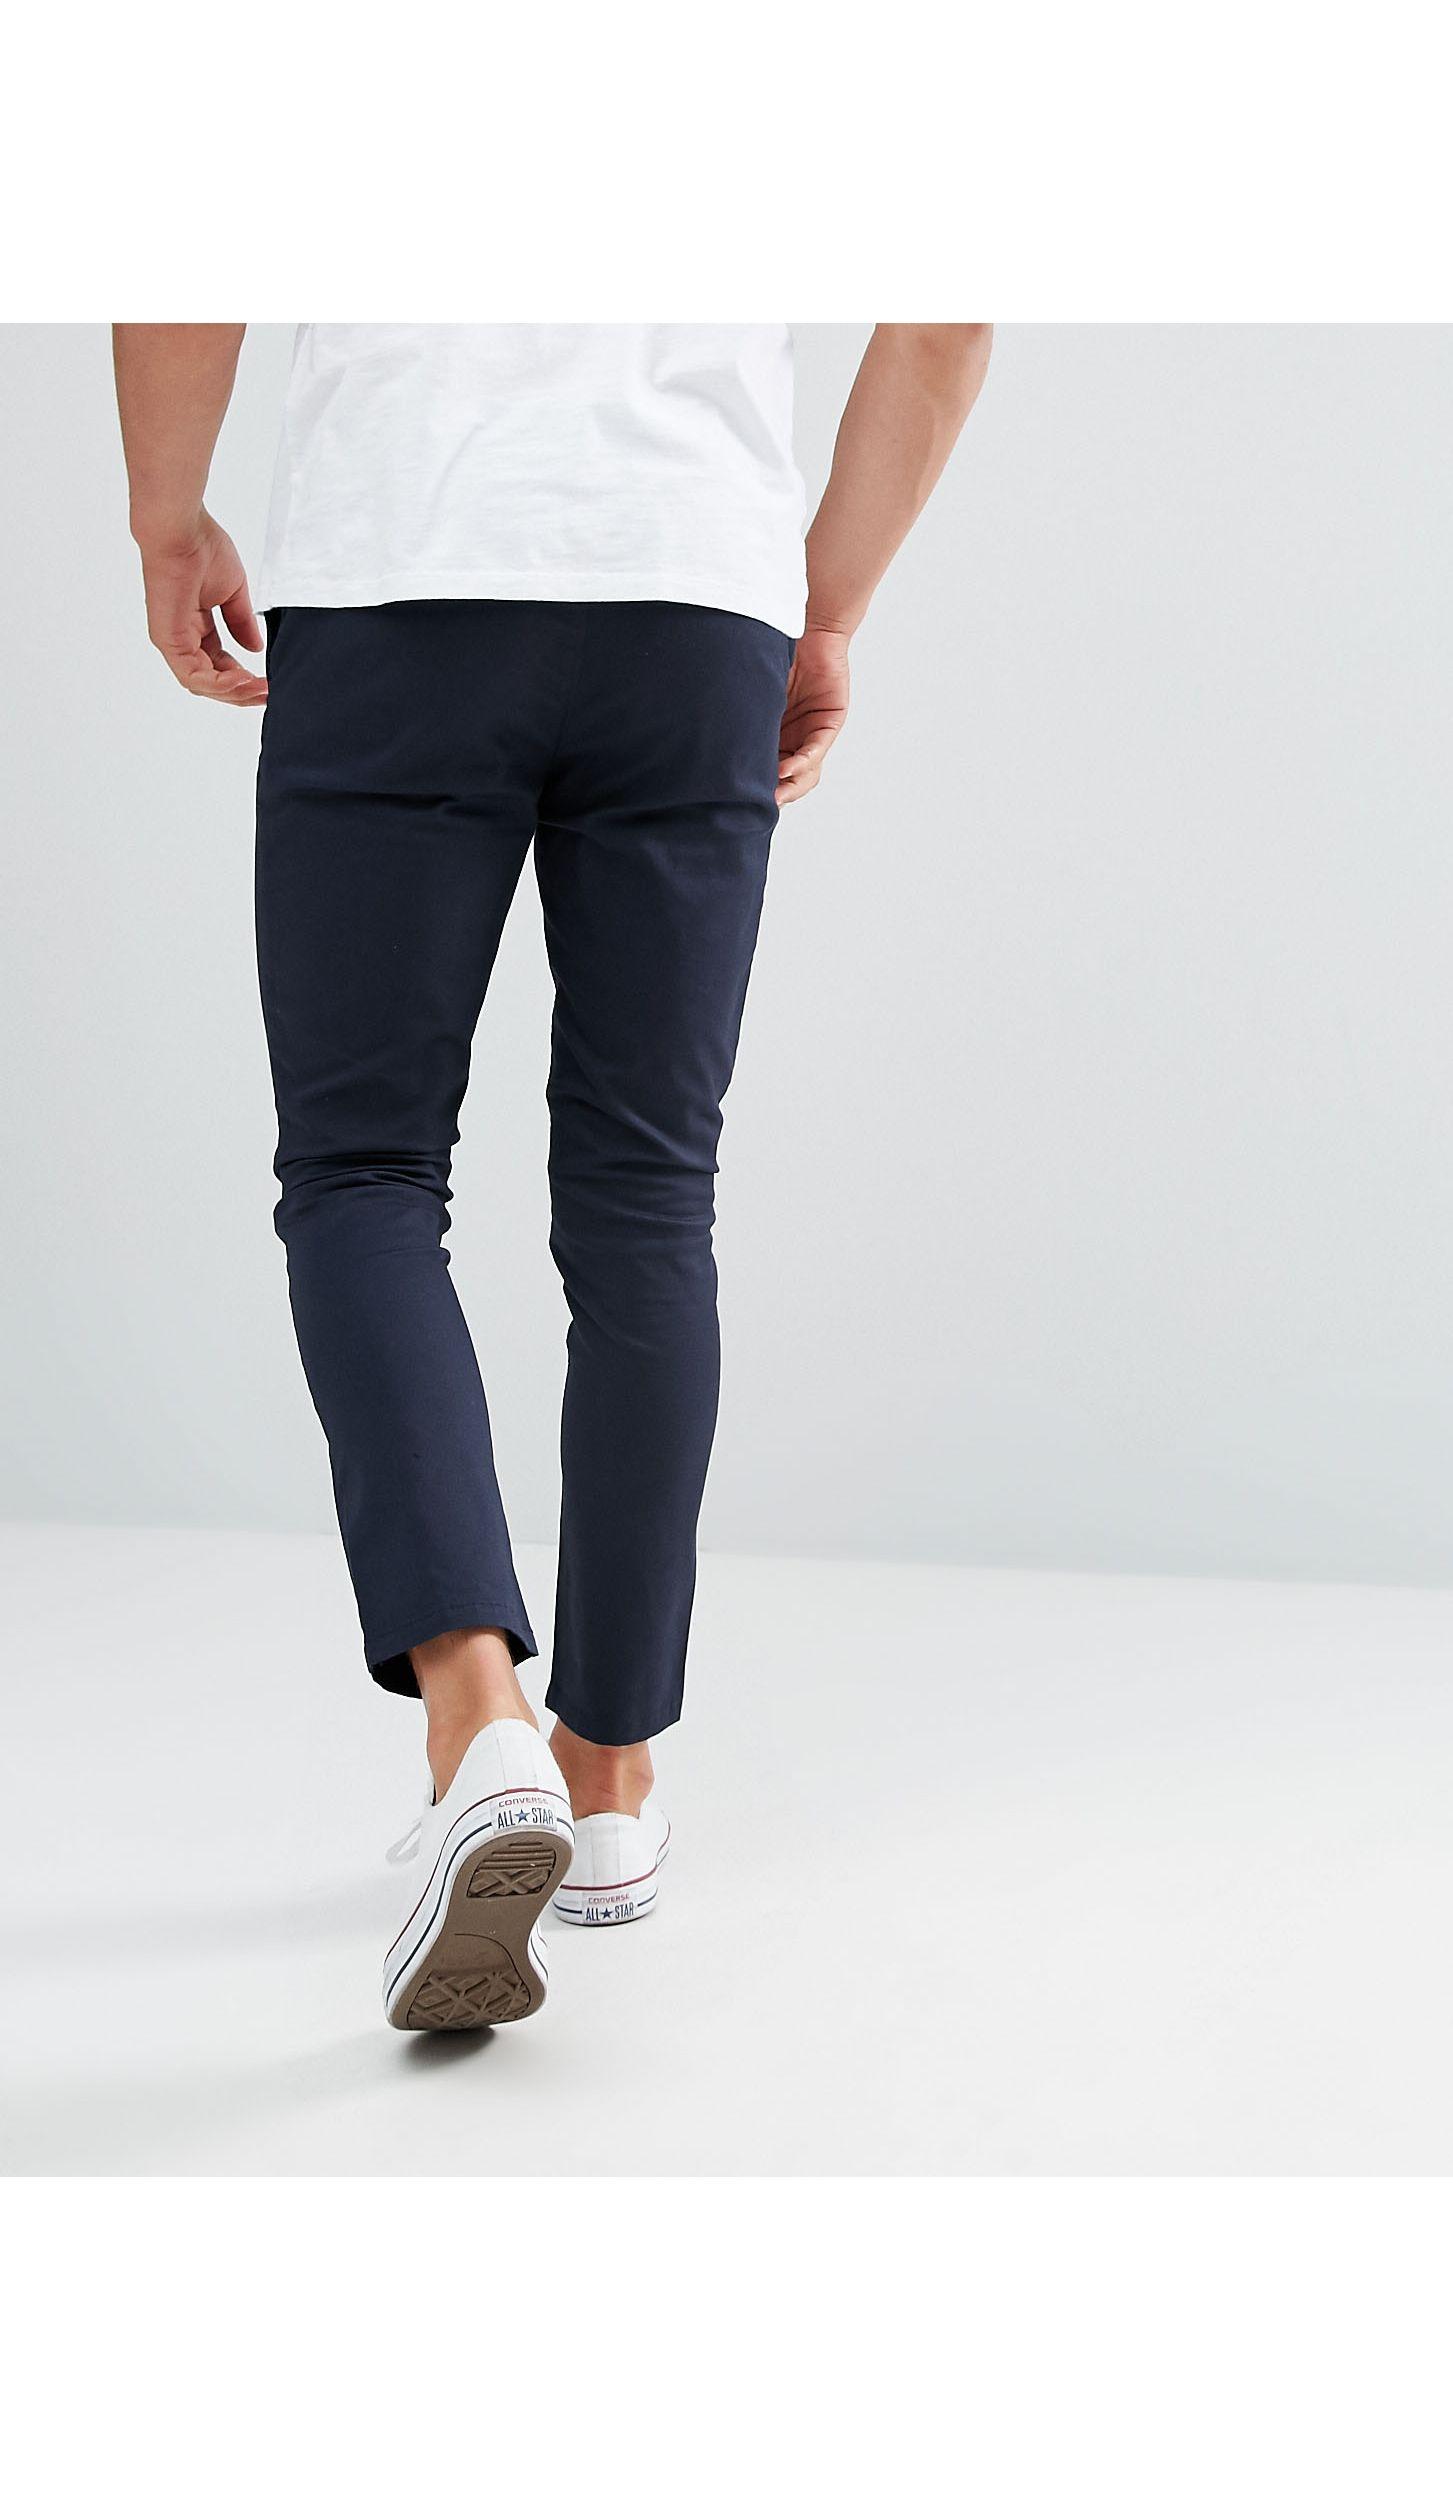 ASOS Cotton Super Skinny Cropped Chinos in Navy (Blue) for Men - Lyst